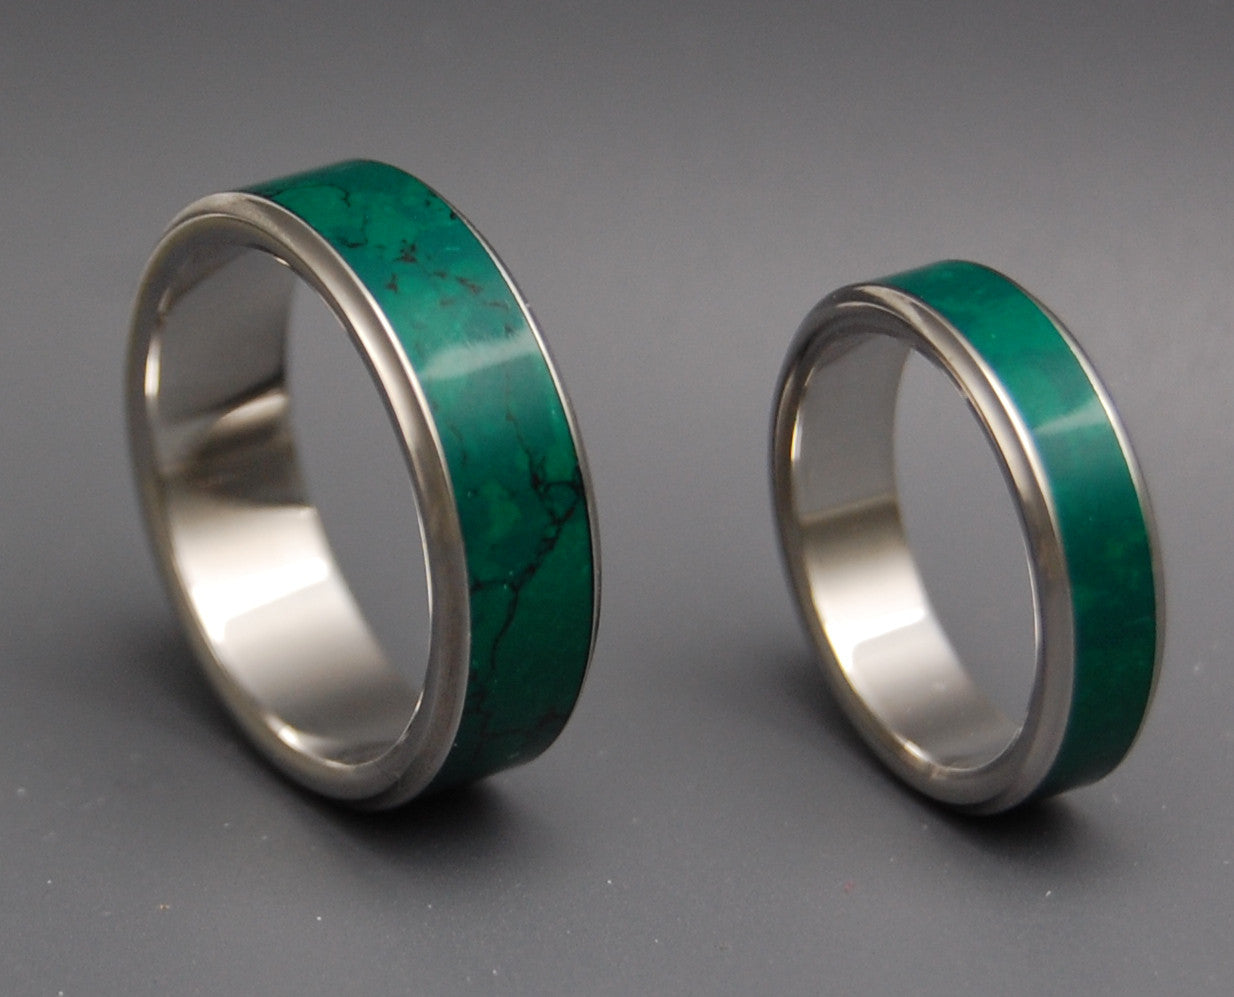 STONE OF HEAVEN | Imperial Jade Titanium Wedding Rings set - Minter and Richter Designs